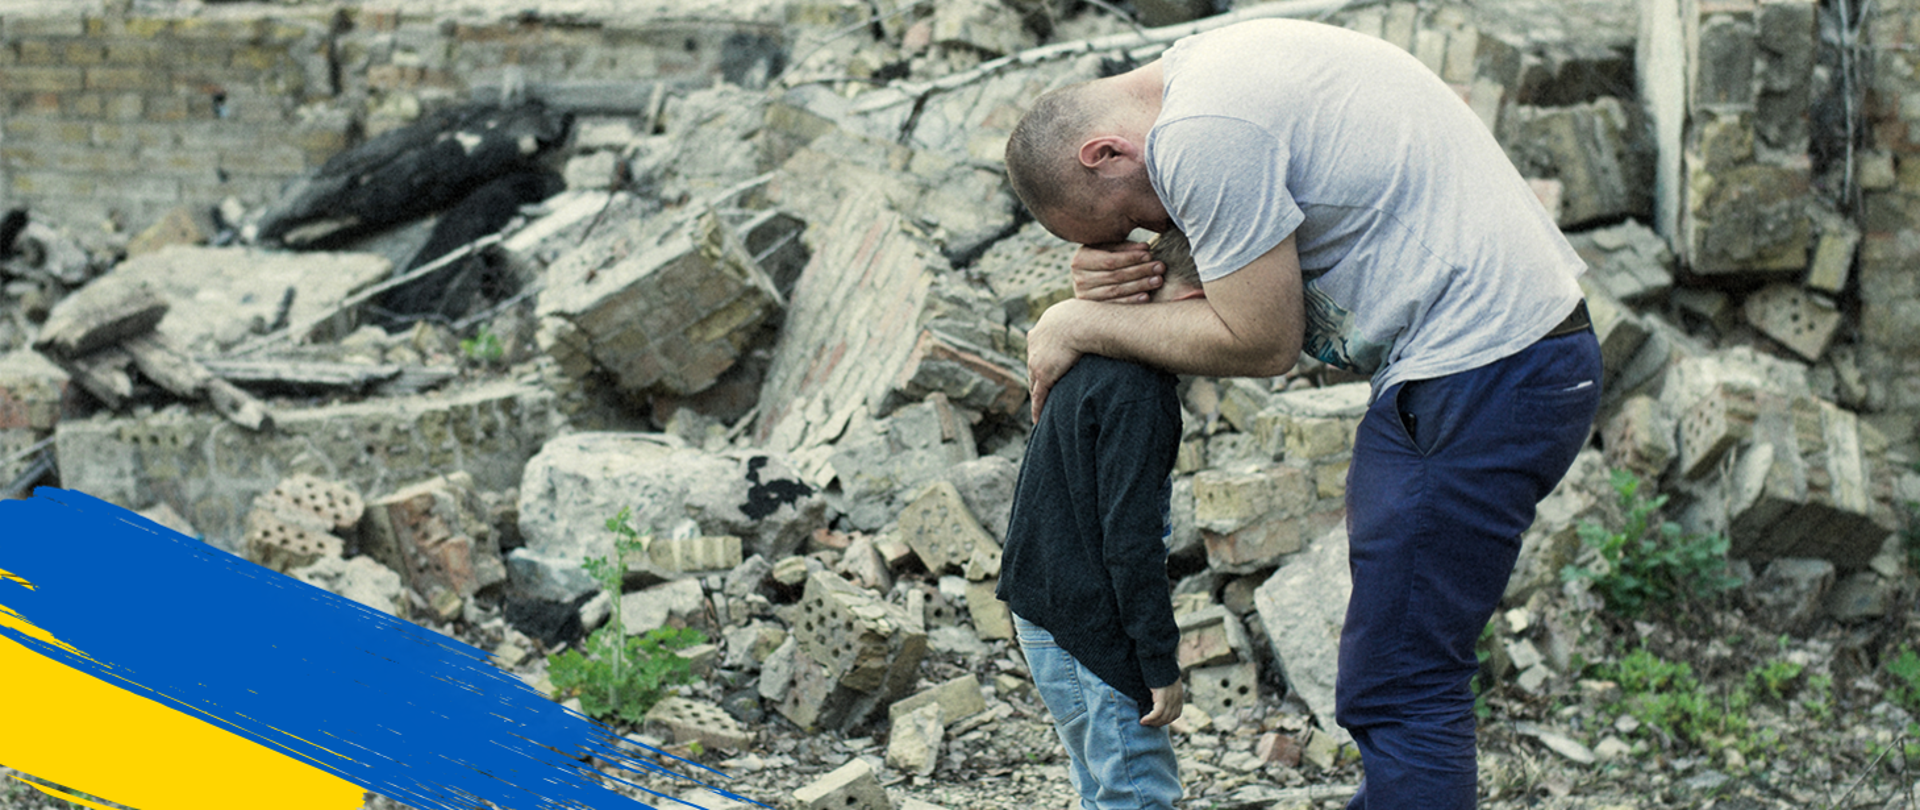 A man hugs a boy. Ruins of a building in the background 